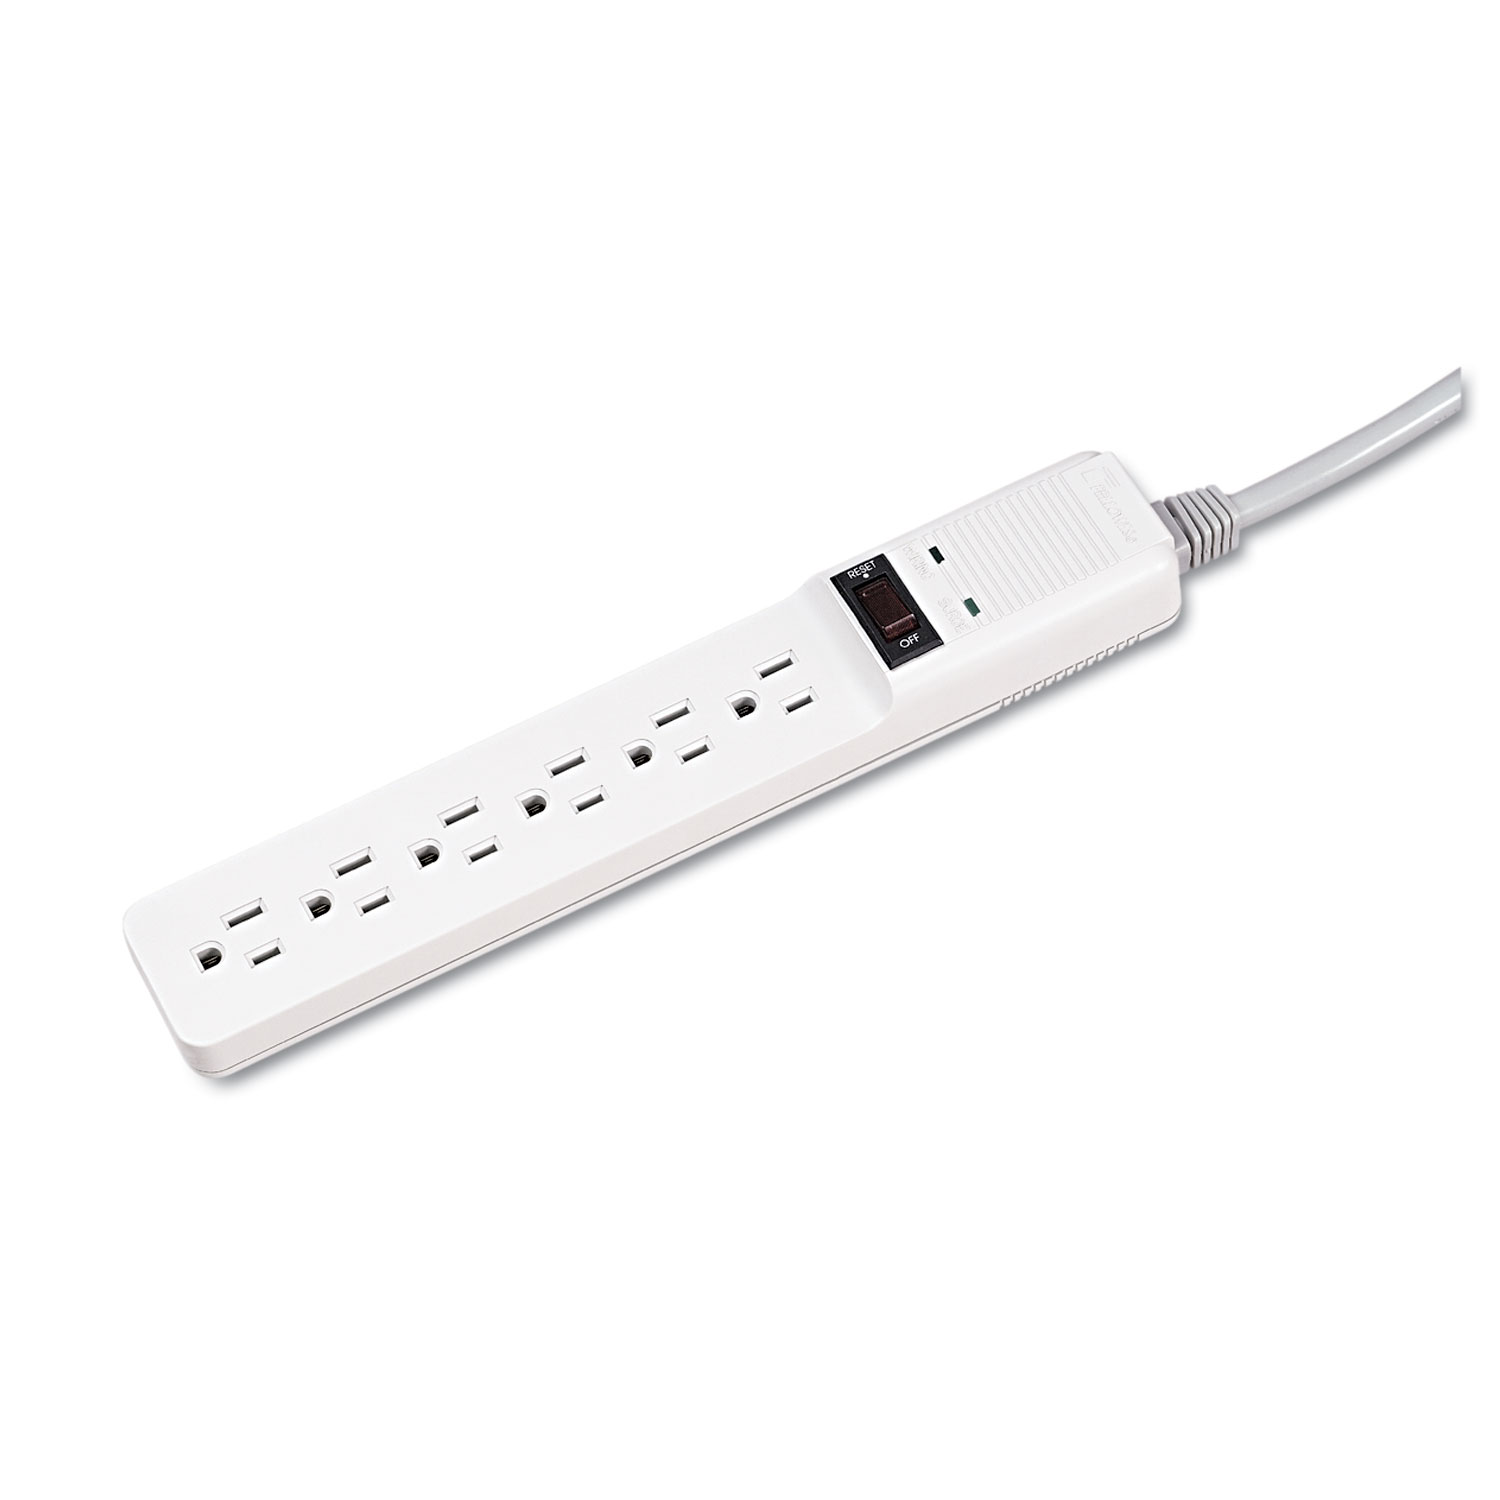  Fellowes 99012 Basic Home/Office Surge Protector, 6 Outlets, 6 ft Cord, 450 Joules, Platinum (FEL99012) 